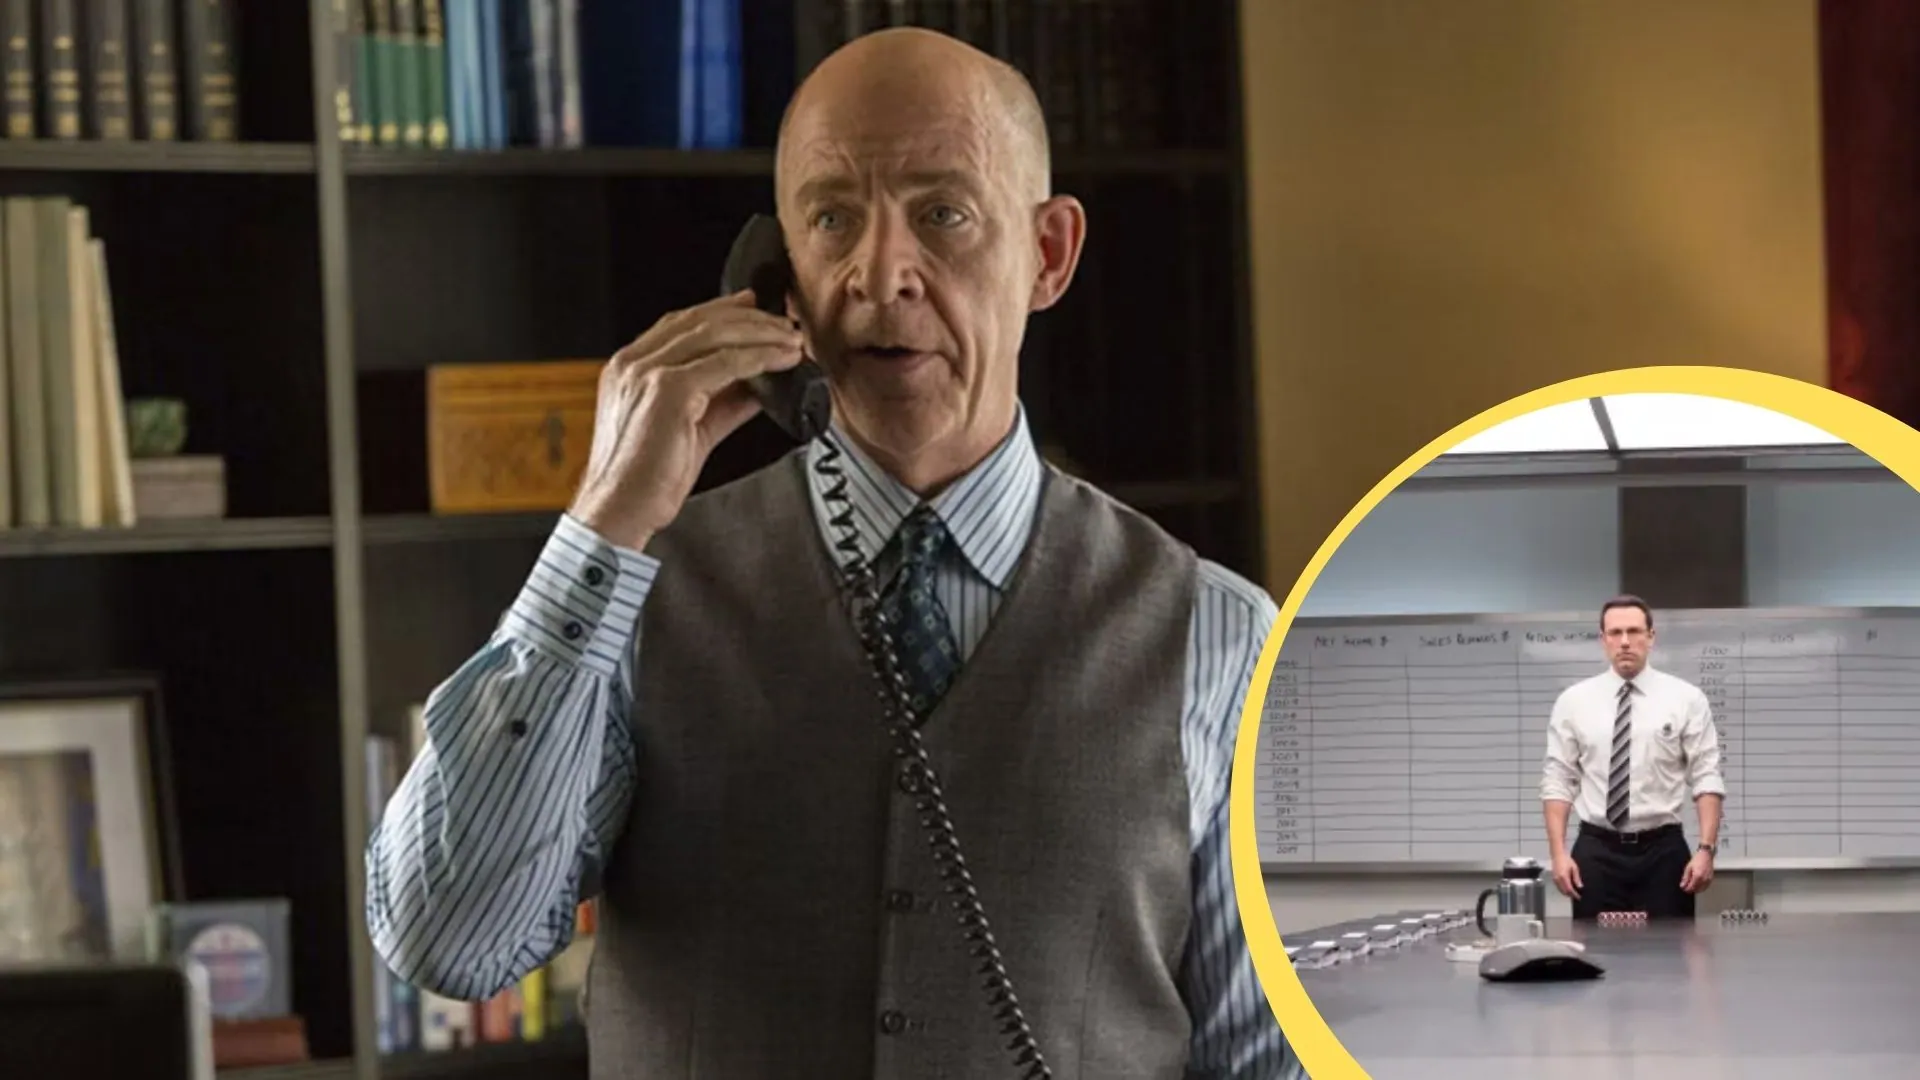 The Accountant 2 J.K. Simmons Confirms Filming Starts Next Week!